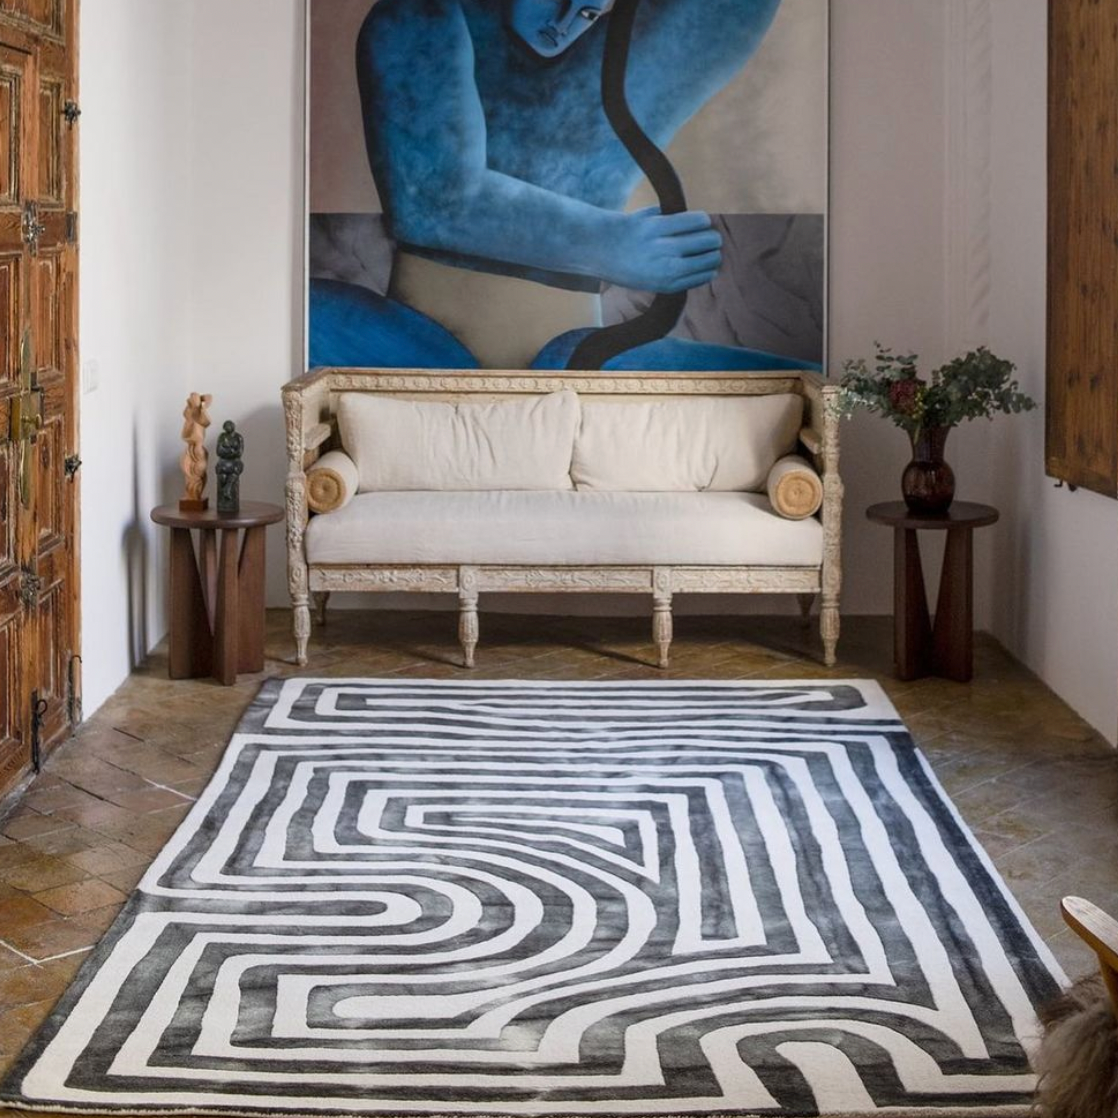 Psychedelic Labyrinth Charcoal Dip Dye Rug - THAT COOL LIVING